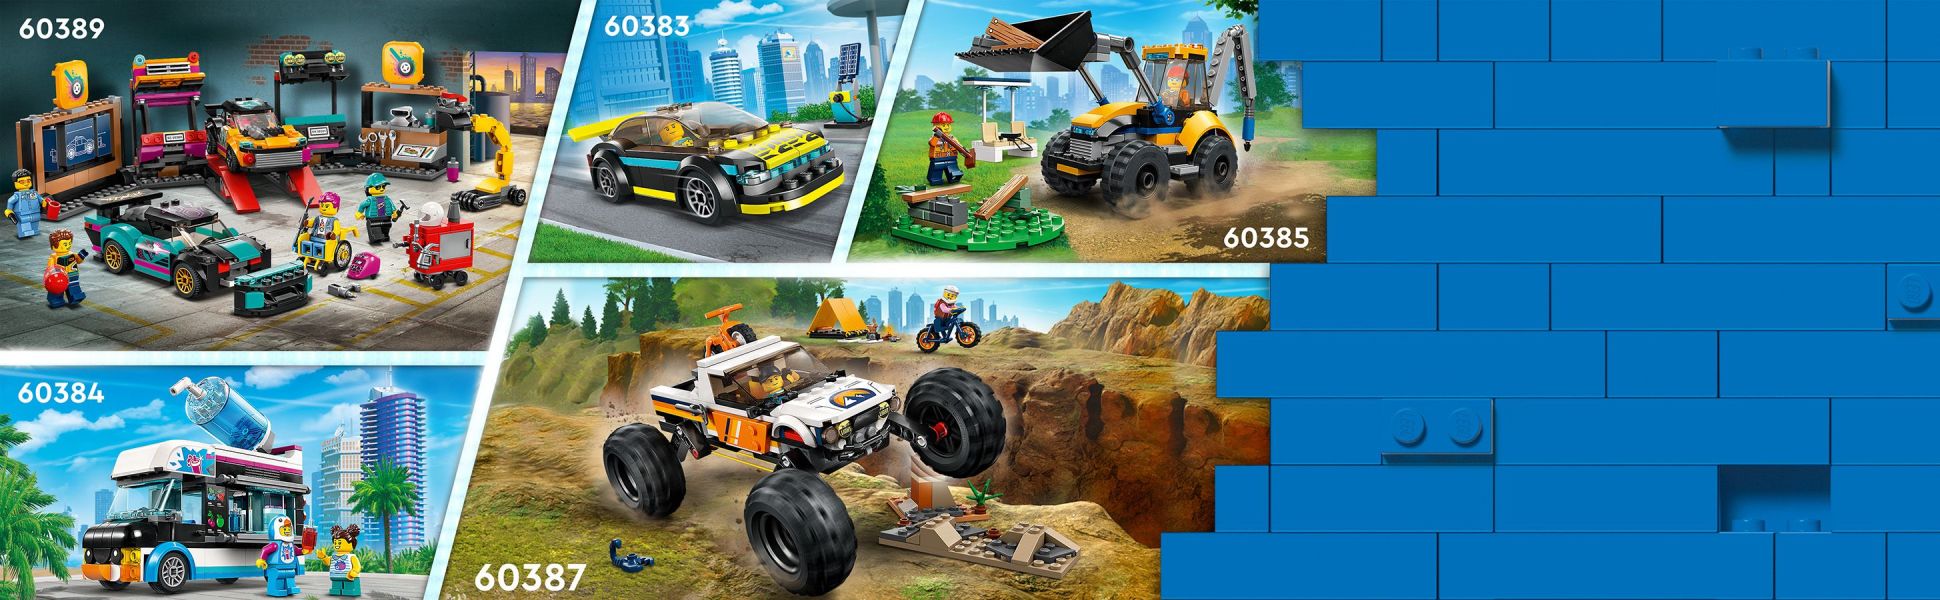 LEGO City 4x4 Off-Roader Adventures Toy 60387 Mountain 2 Camping for Ages Working Car Bikes, Style Suspension Including and 6+ with - Building Vehicle Toy Truck Monster Kids Minifigures, Set